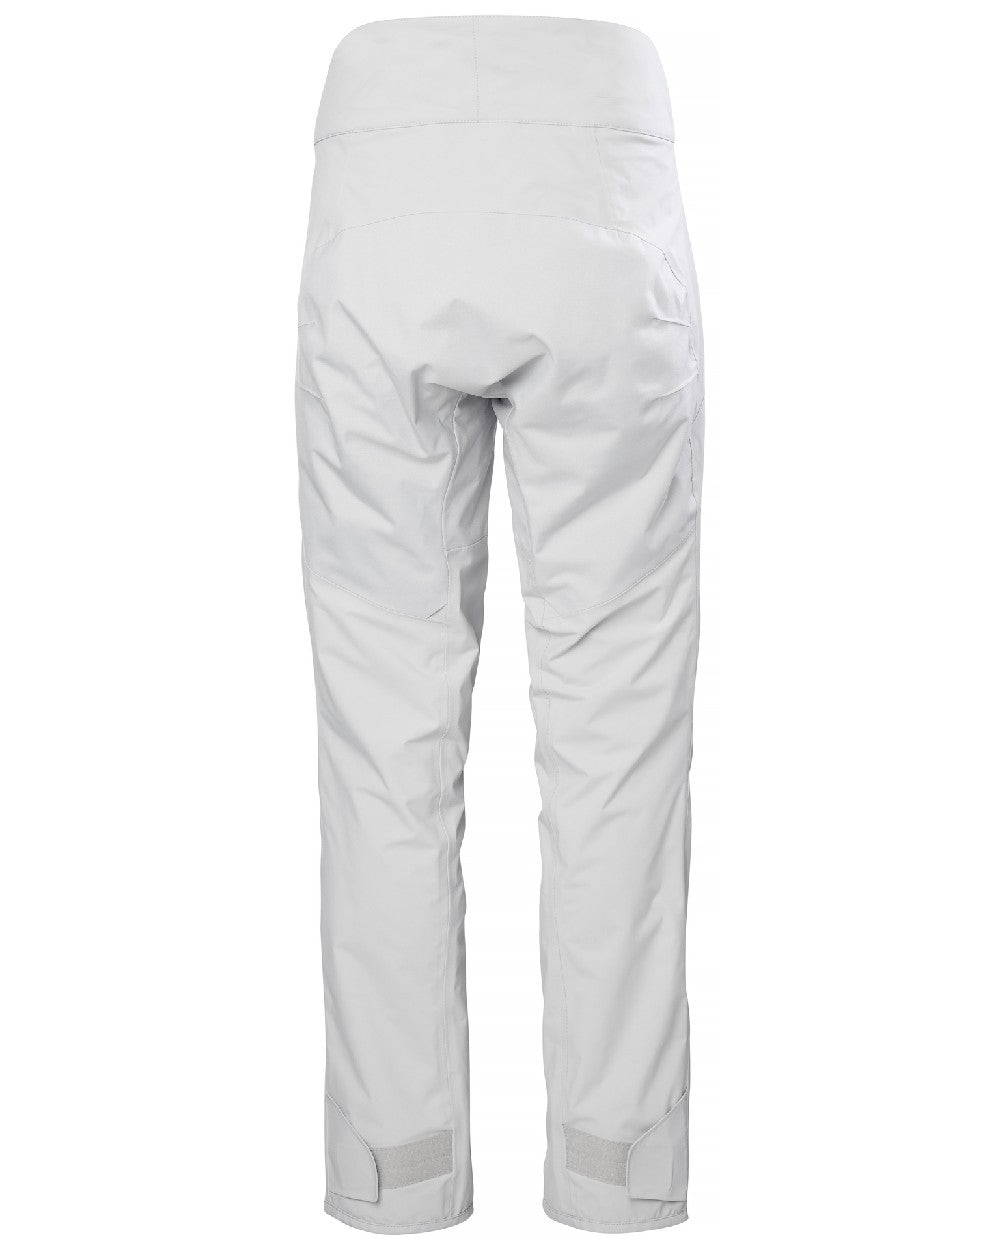 Grey Fog coloured Helly Hansen Womens HP Foil Sailing Pants 2.0 on white background 